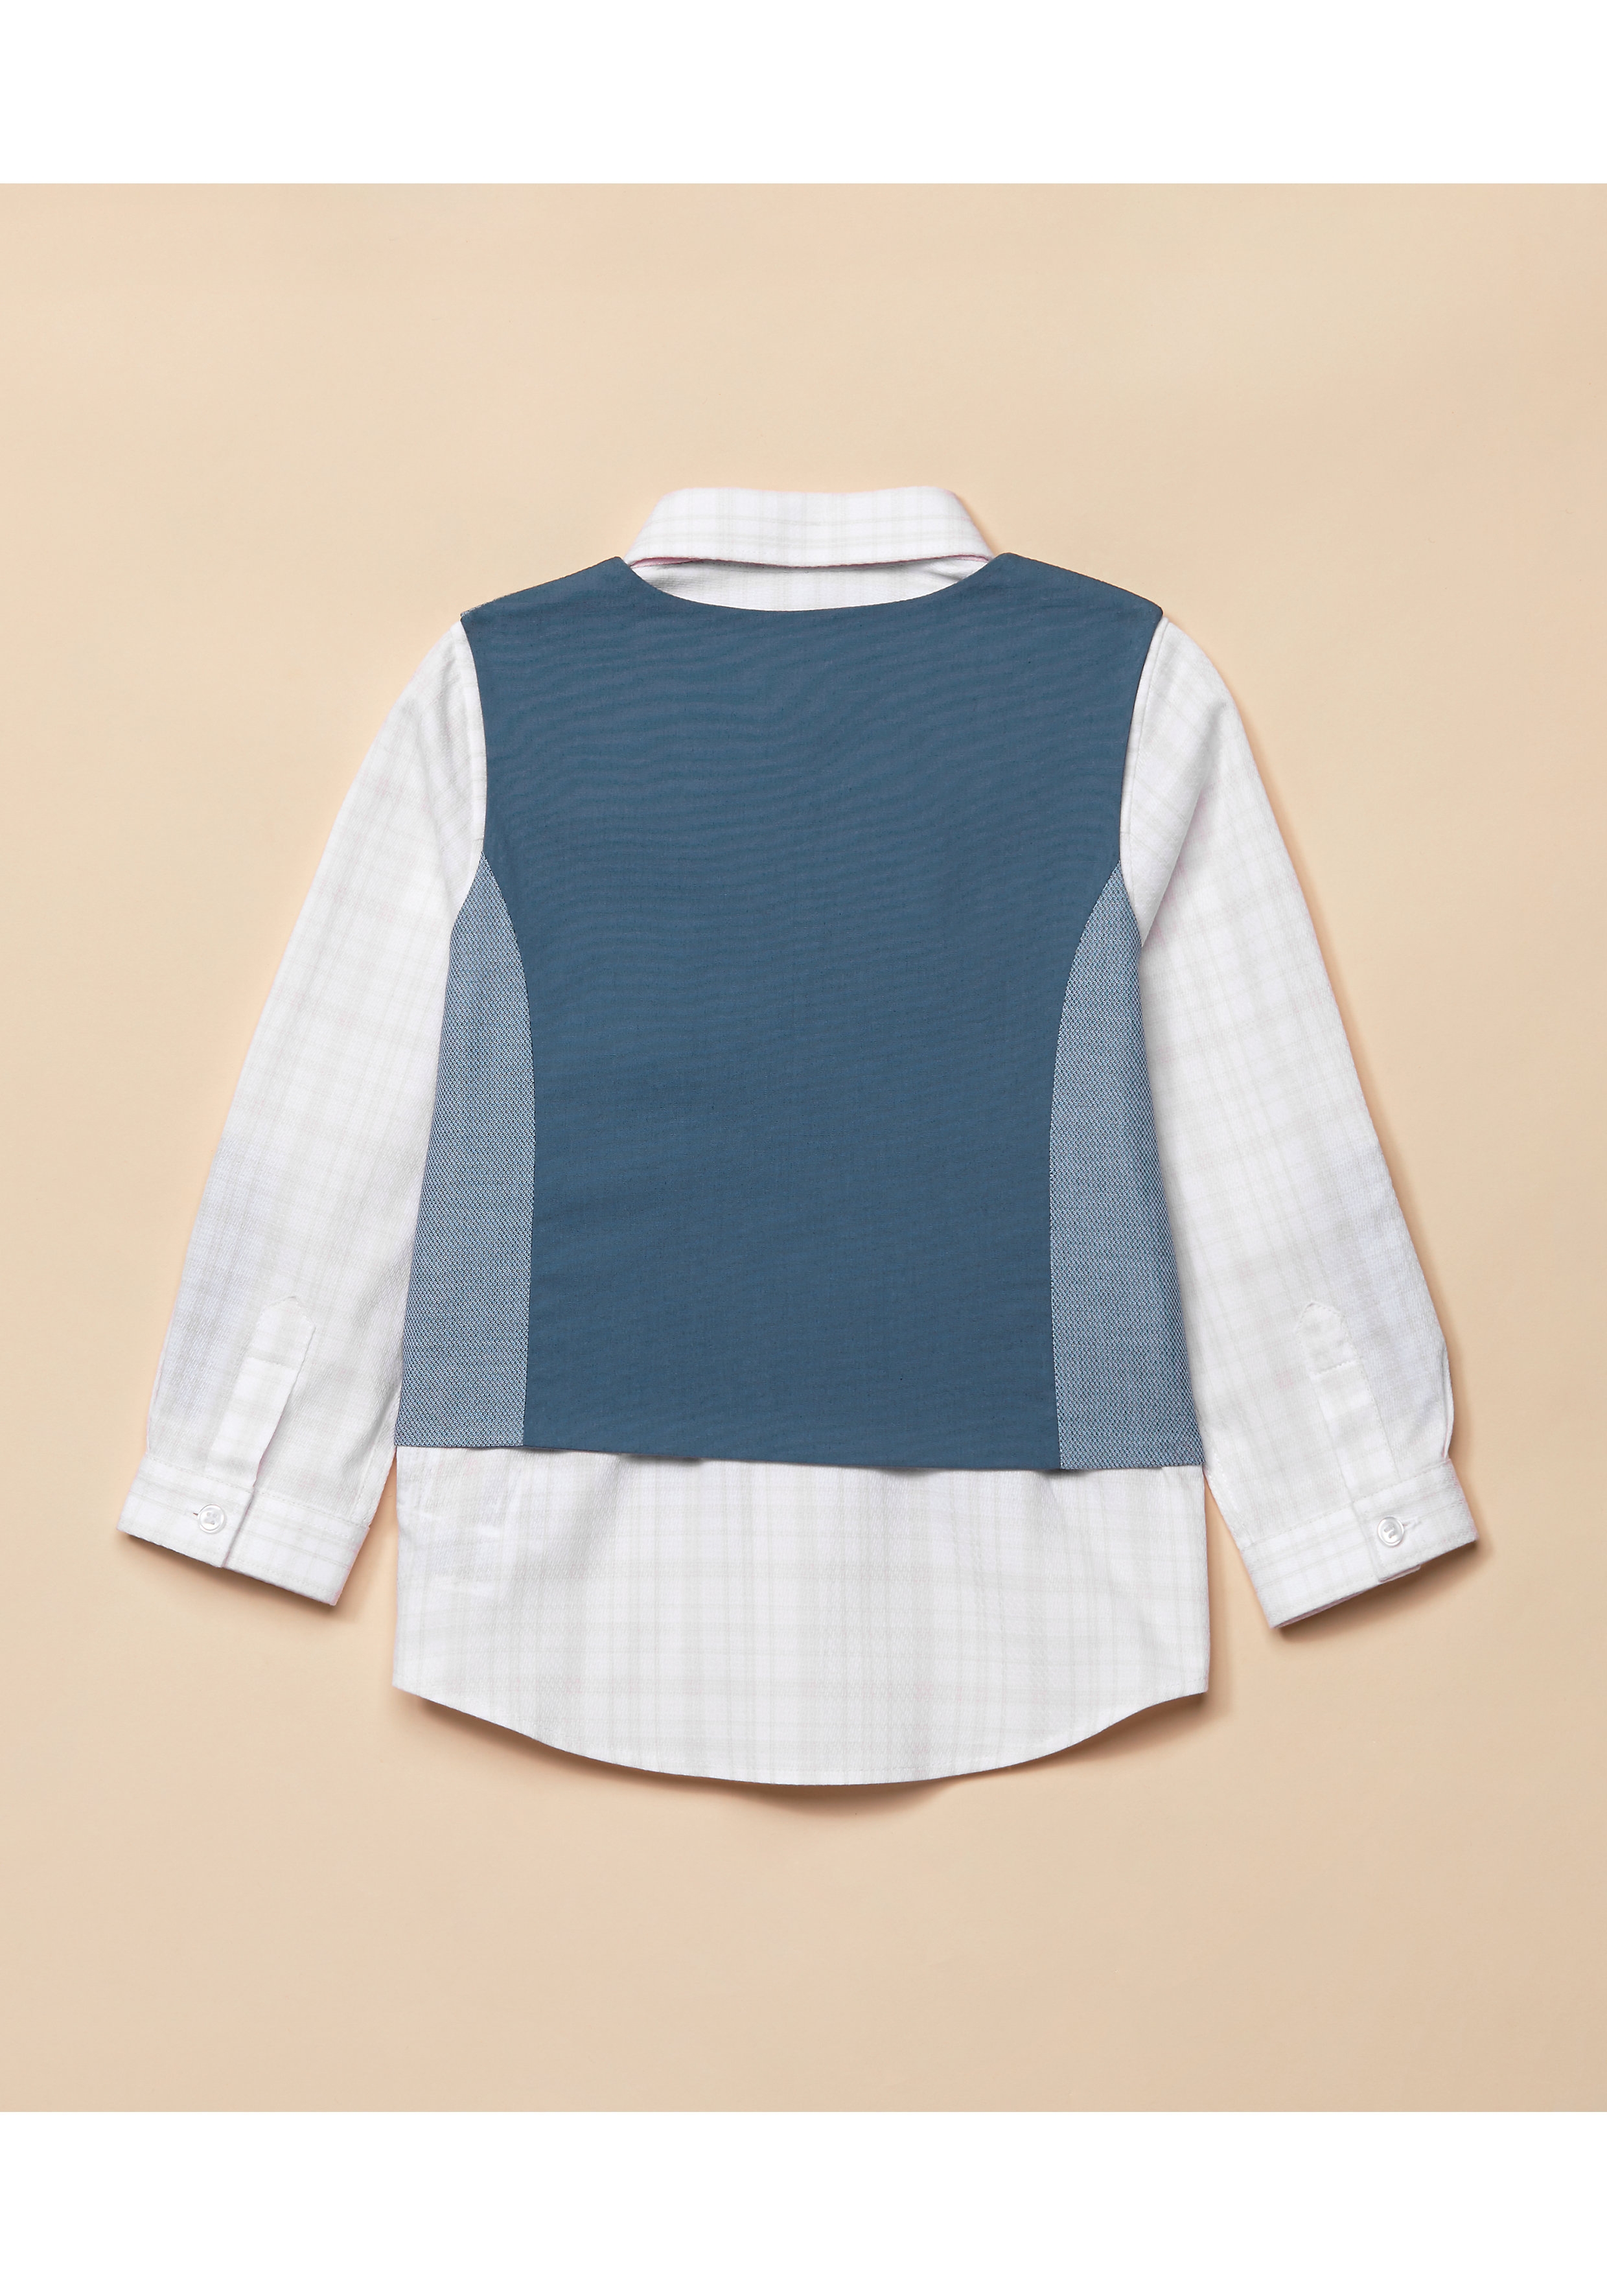 Mothercare | Boys Full Sleeves Shirt With Waistcoat - White Blue 1